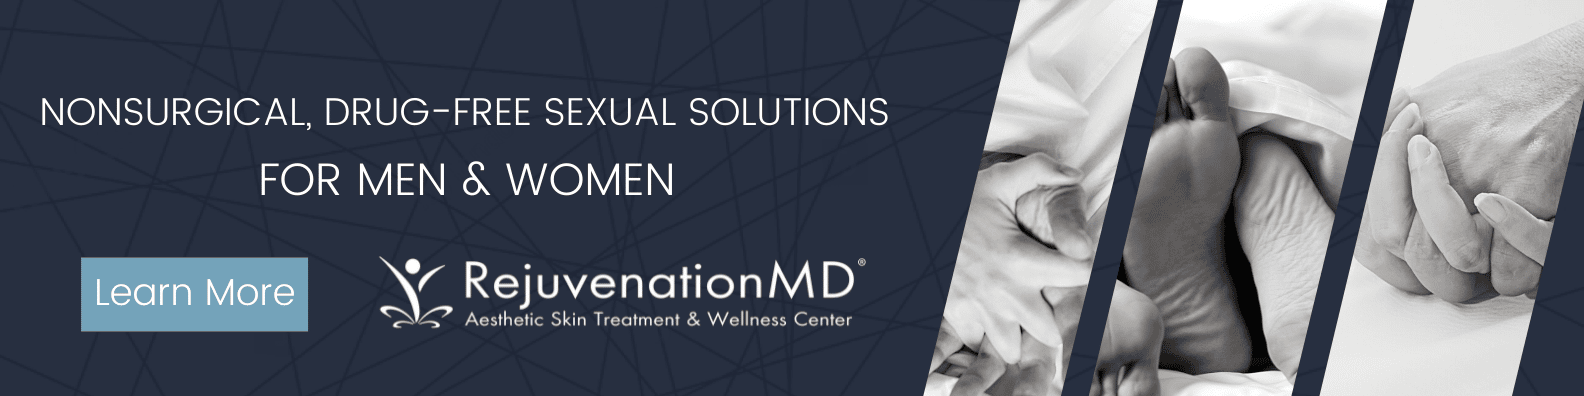 RejuvenationMD Experts in Sexual Wellness